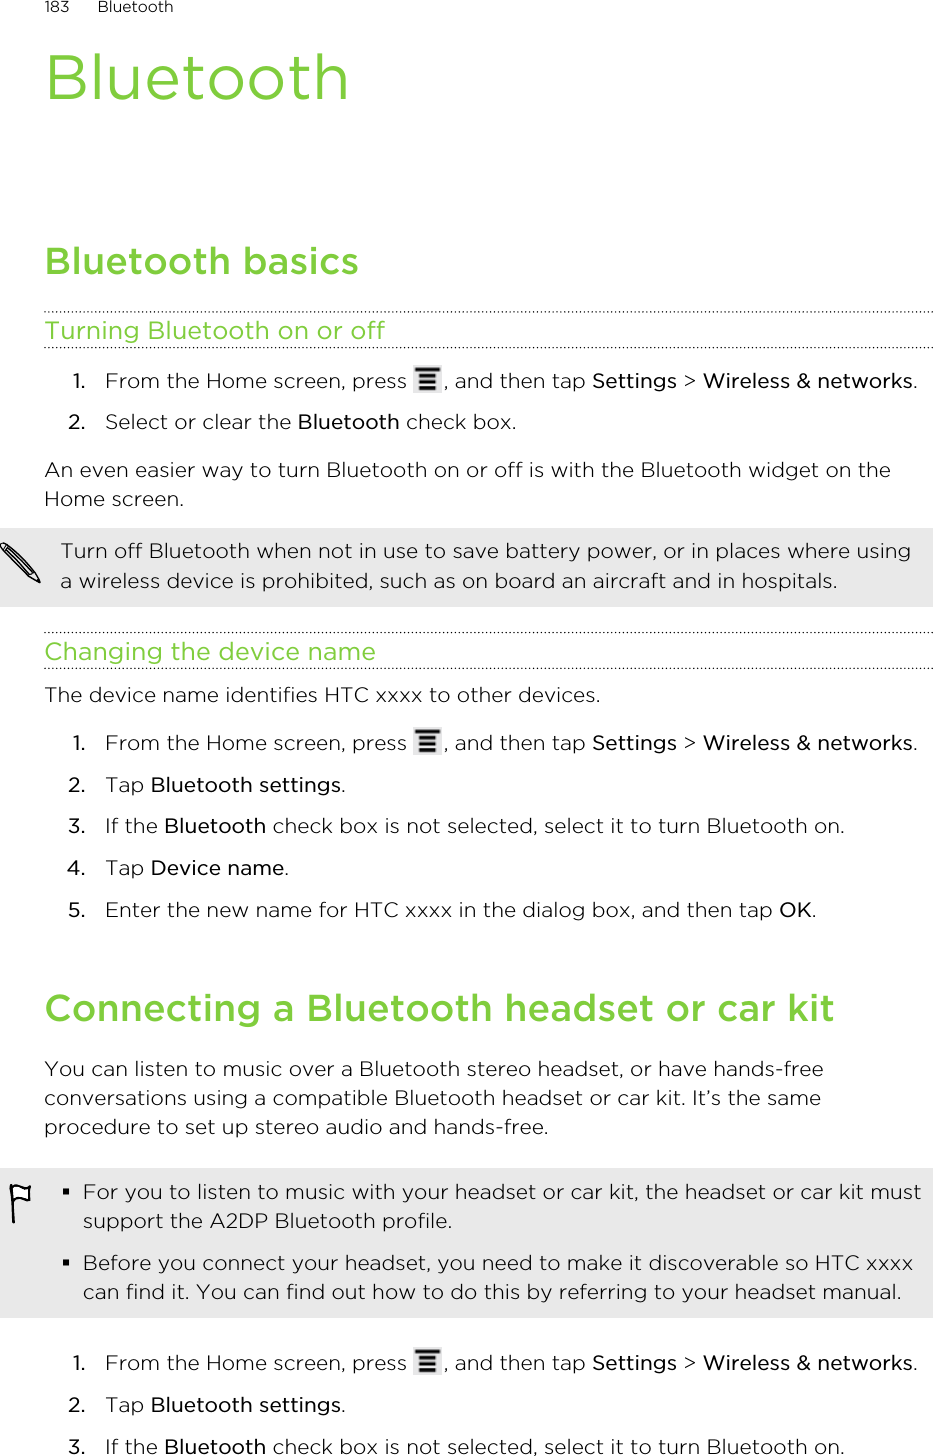 BluetoothBluetooth basicsTurning Bluetooth on or off1. From the Home screen, press  , and then tap Settings &gt; Wireless &amp; networks.2. Select or clear the Bluetooth check box.An even easier way to turn Bluetooth on or off is with the Bluetooth widget on theHome screen.Turn off Bluetooth when not in use to save battery power, or in places where usinga wireless device is prohibited, such as on board an aircraft and in hospitals.Changing the device nameThe device name identifies HTC xxxx to other devices.1. From the Home screen, press  , and then tap Settings &gt; Wireless &amp; networks.2. Tap Bluetooth settings.3. If the Bluetooth check box is not selected, select it to turn Bluetooth on.4. Tap Device name.5. Enter the new name for HTC xxxx in the dialog box, and then tap OK.Connecting a Bluetooth headset or car kitYou can listen to music over a Bluetooth stereo headset, or have hands-freeconversations using a compatible Bluetooth headset or car kit. It’s the sameprocedure to set up stereo audio and hands-free.§For you to listen to music with your headset or car kit, the headset or car kit mustsupport the A2DP Bluetooth profile.§Before you connect your headset, you need to make it discoverable so HTC xxxxcan find it. You can find out how to do this by referring to your headset manual.1. From the Home screen, press  , and then tap Settings &gt; Wireless &amp; networks.2. Tap Bluetooth settings.3. If the Bluetooth check box is not selected, select it to turn Bluetooth on.183 Bluetooth